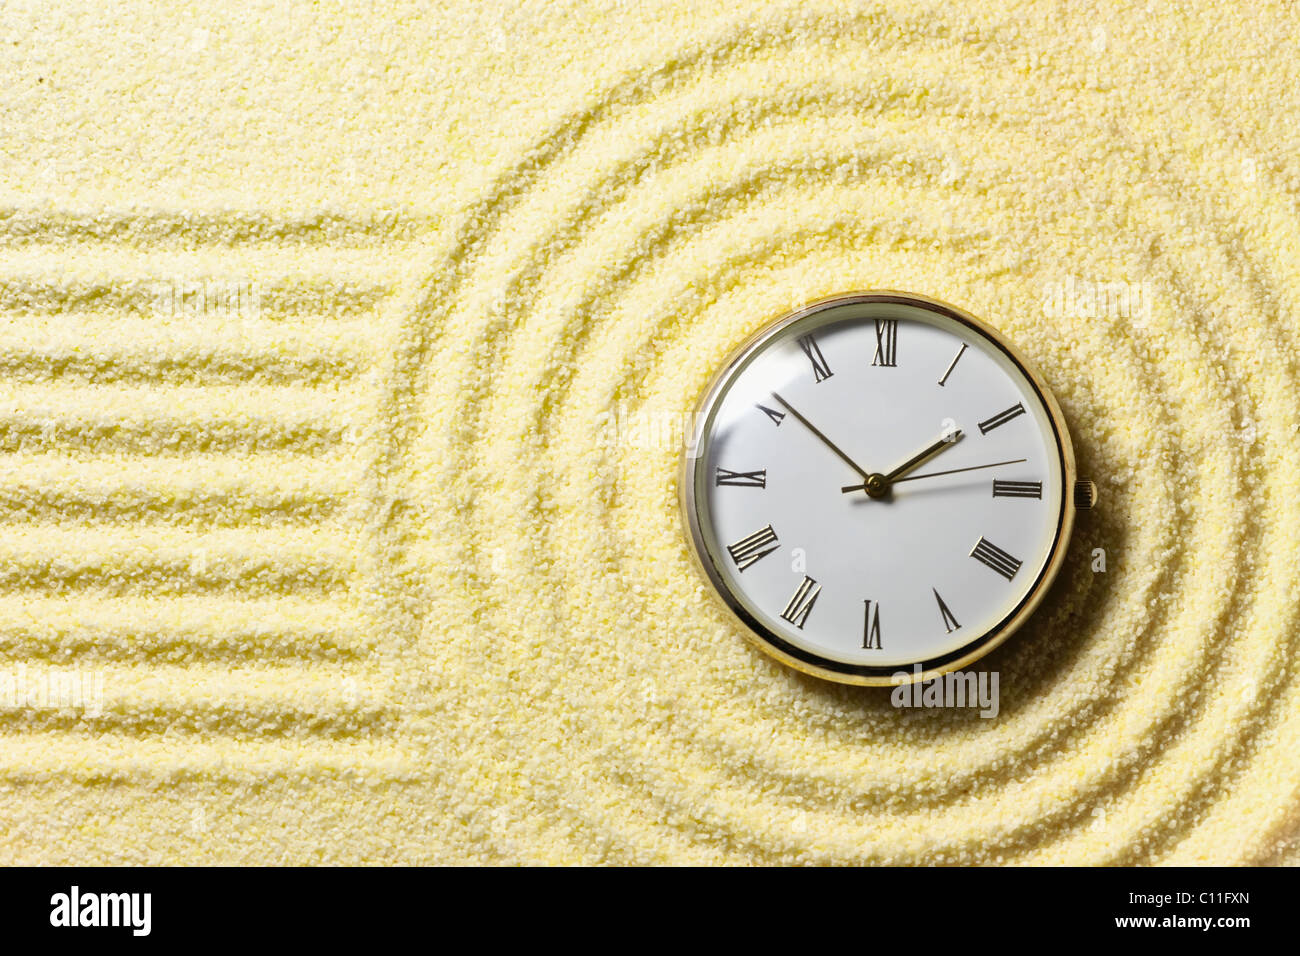 Composition on Zen garden - sand, and watch Stock Photo